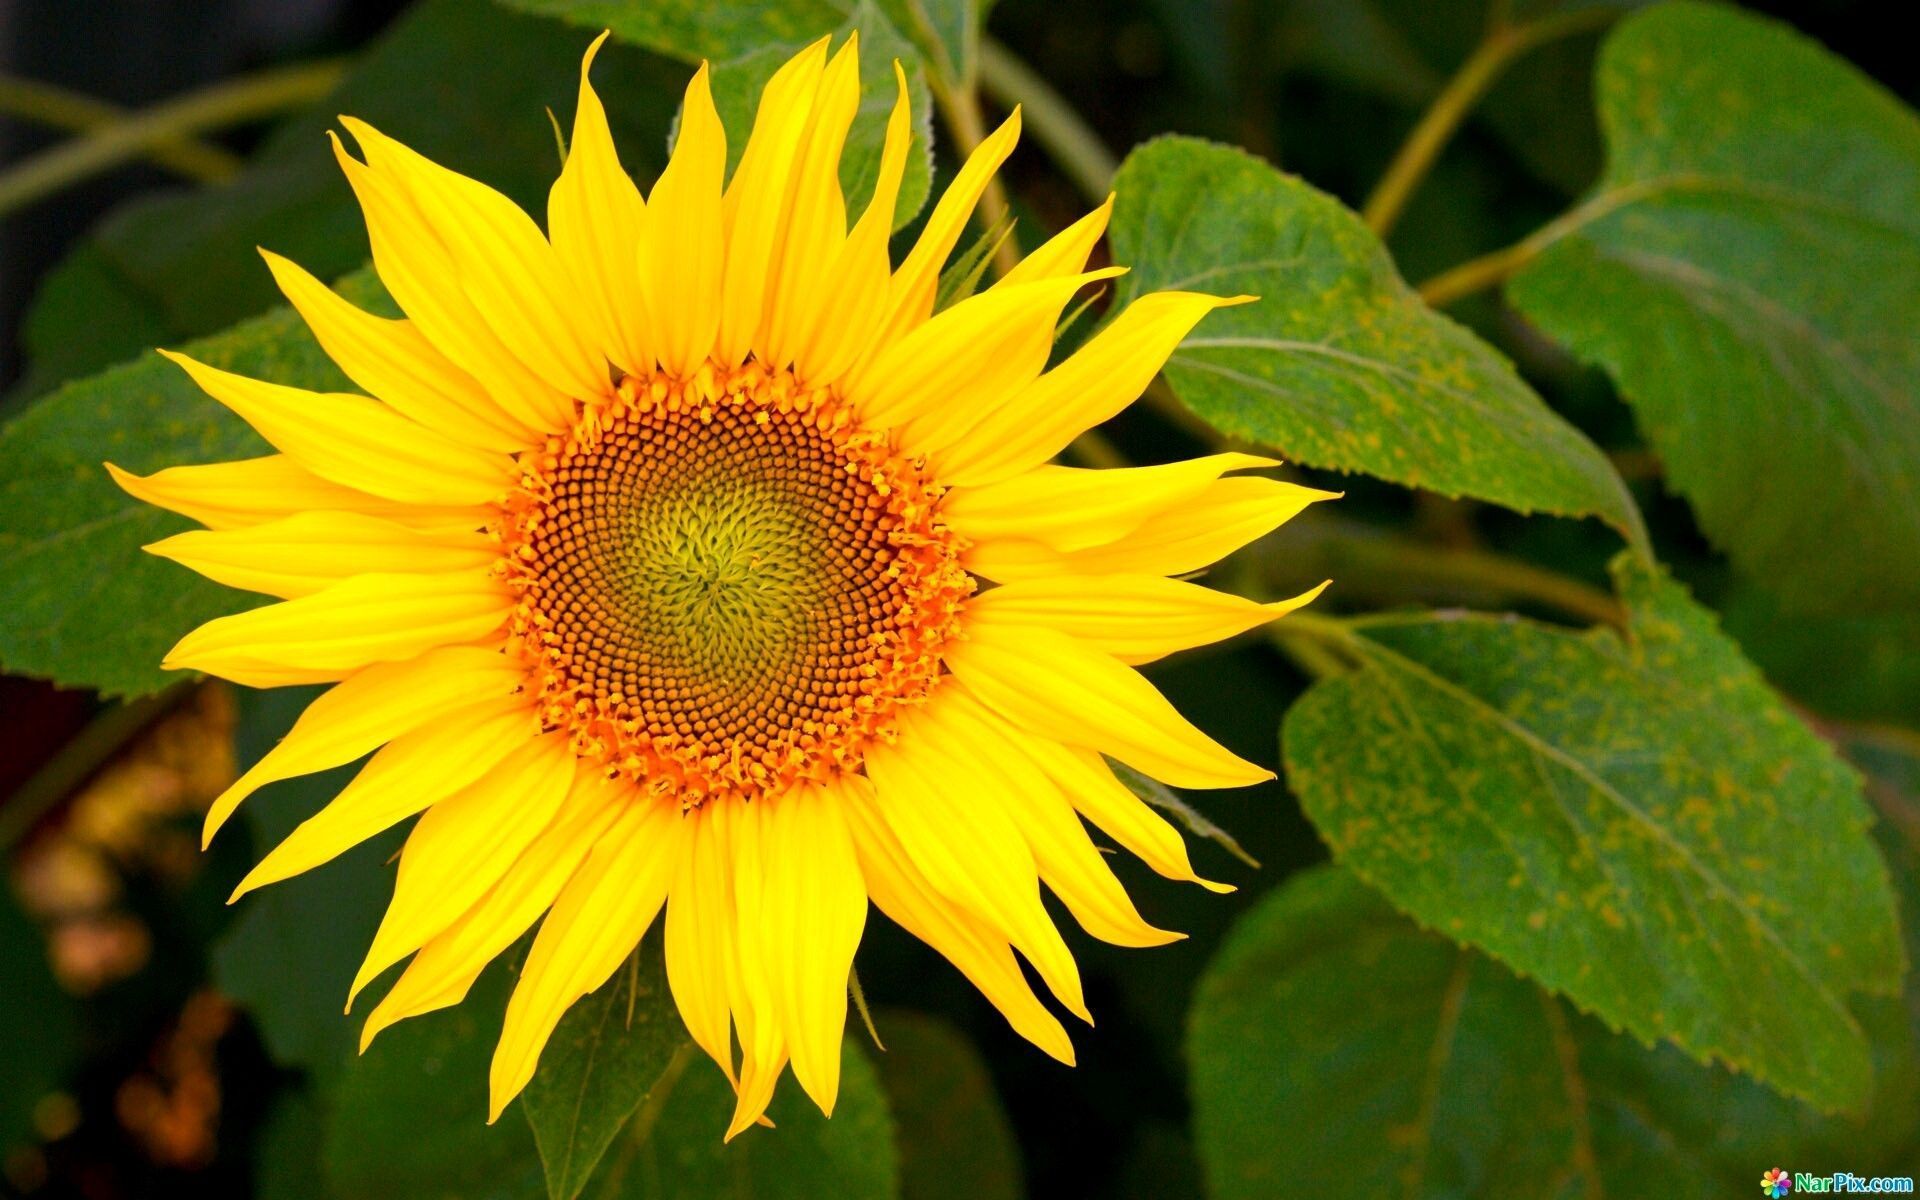 Sunflower HD Wallpapers Images Pictures Photos Download